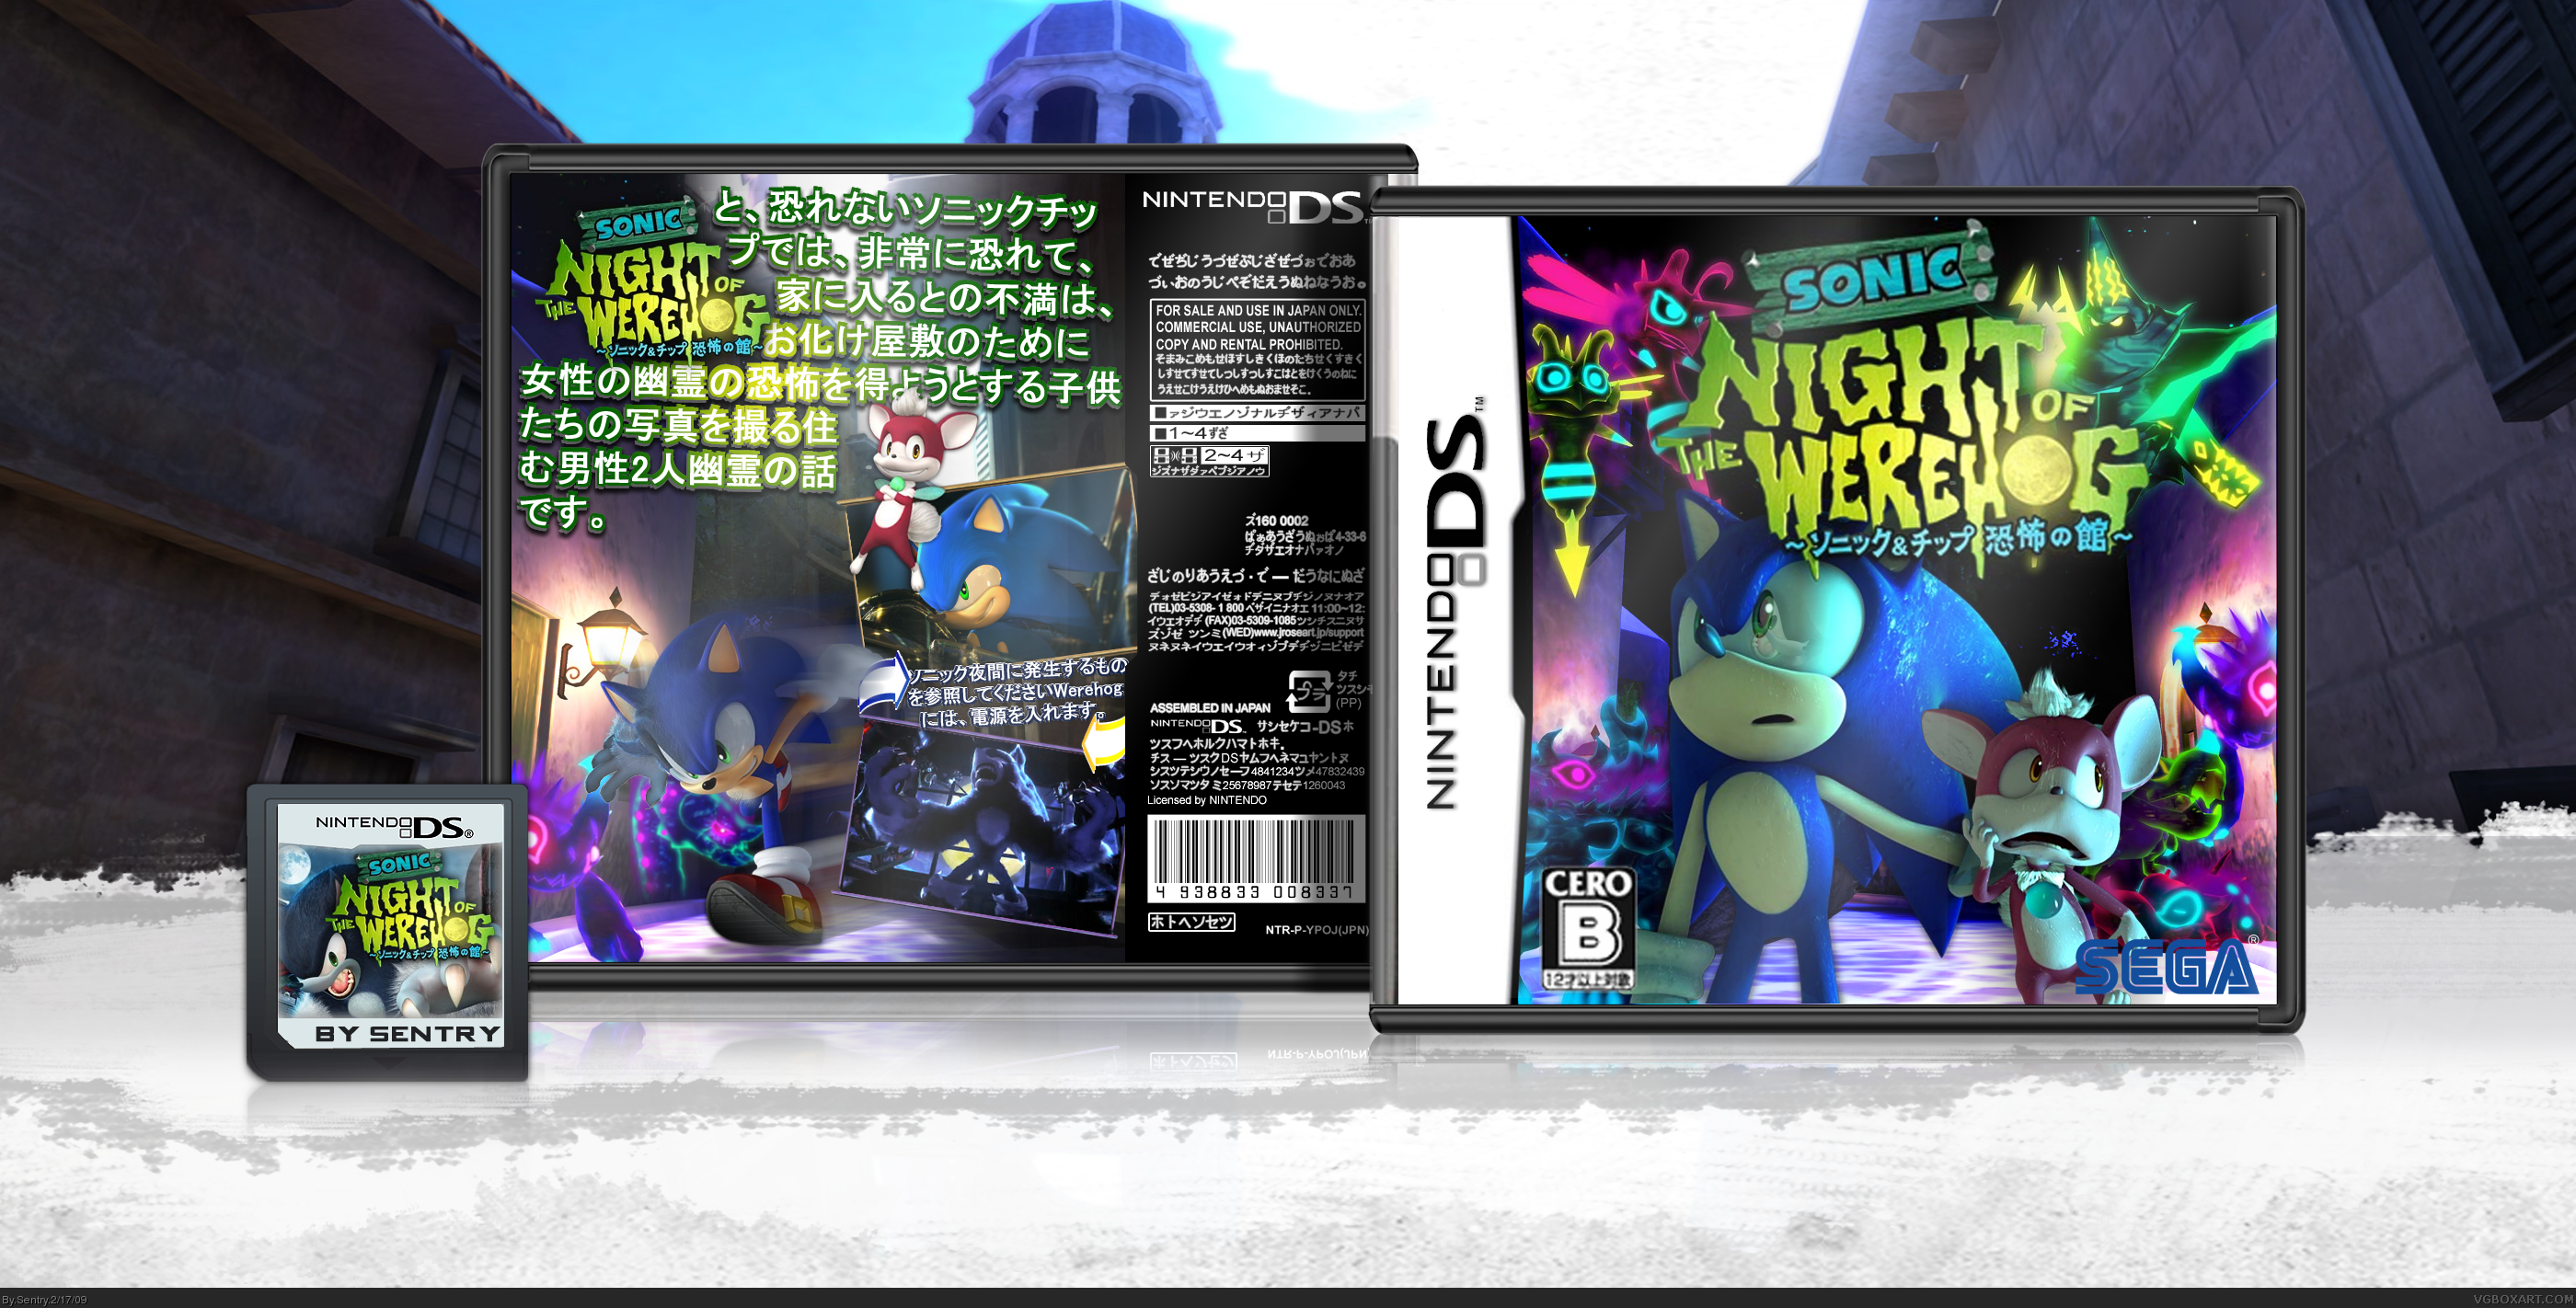 Sonic: Night of the Werehog box cover